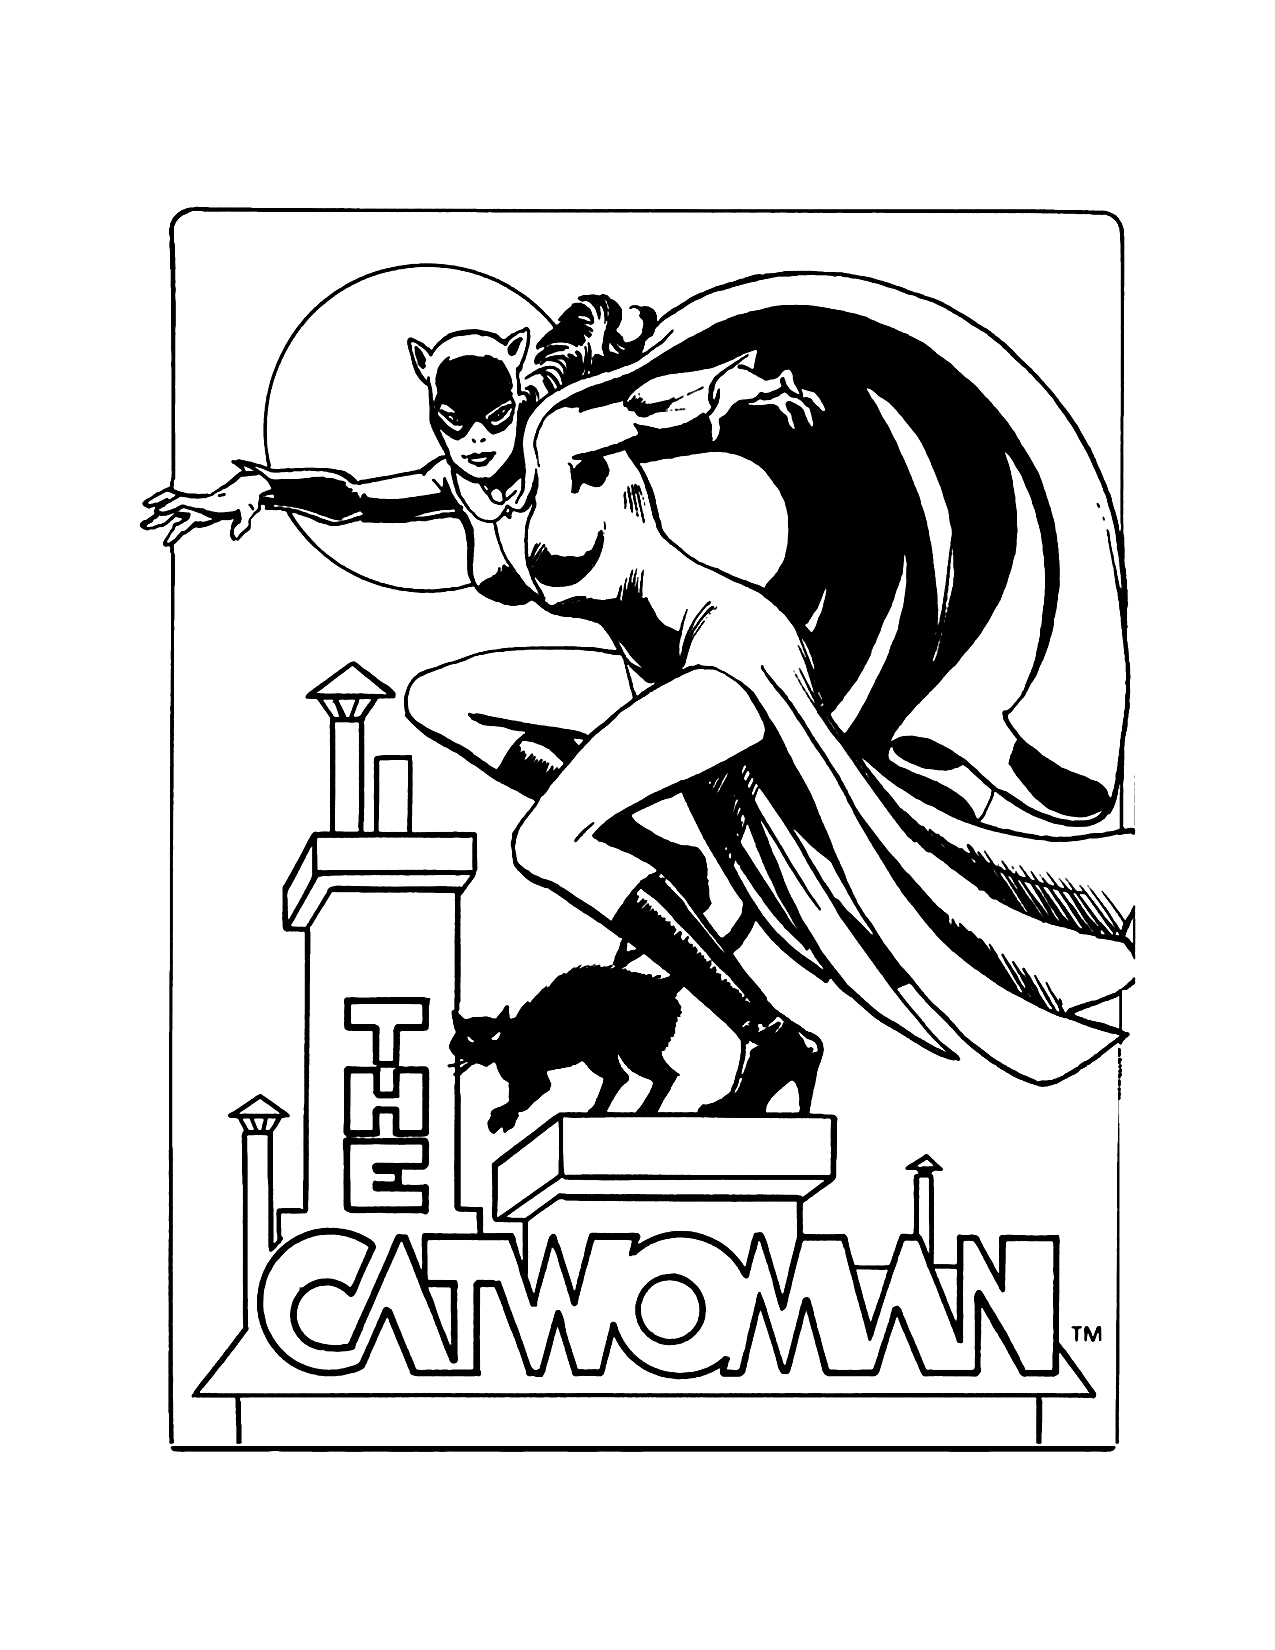 The Catwoman Batman Coloring Pages